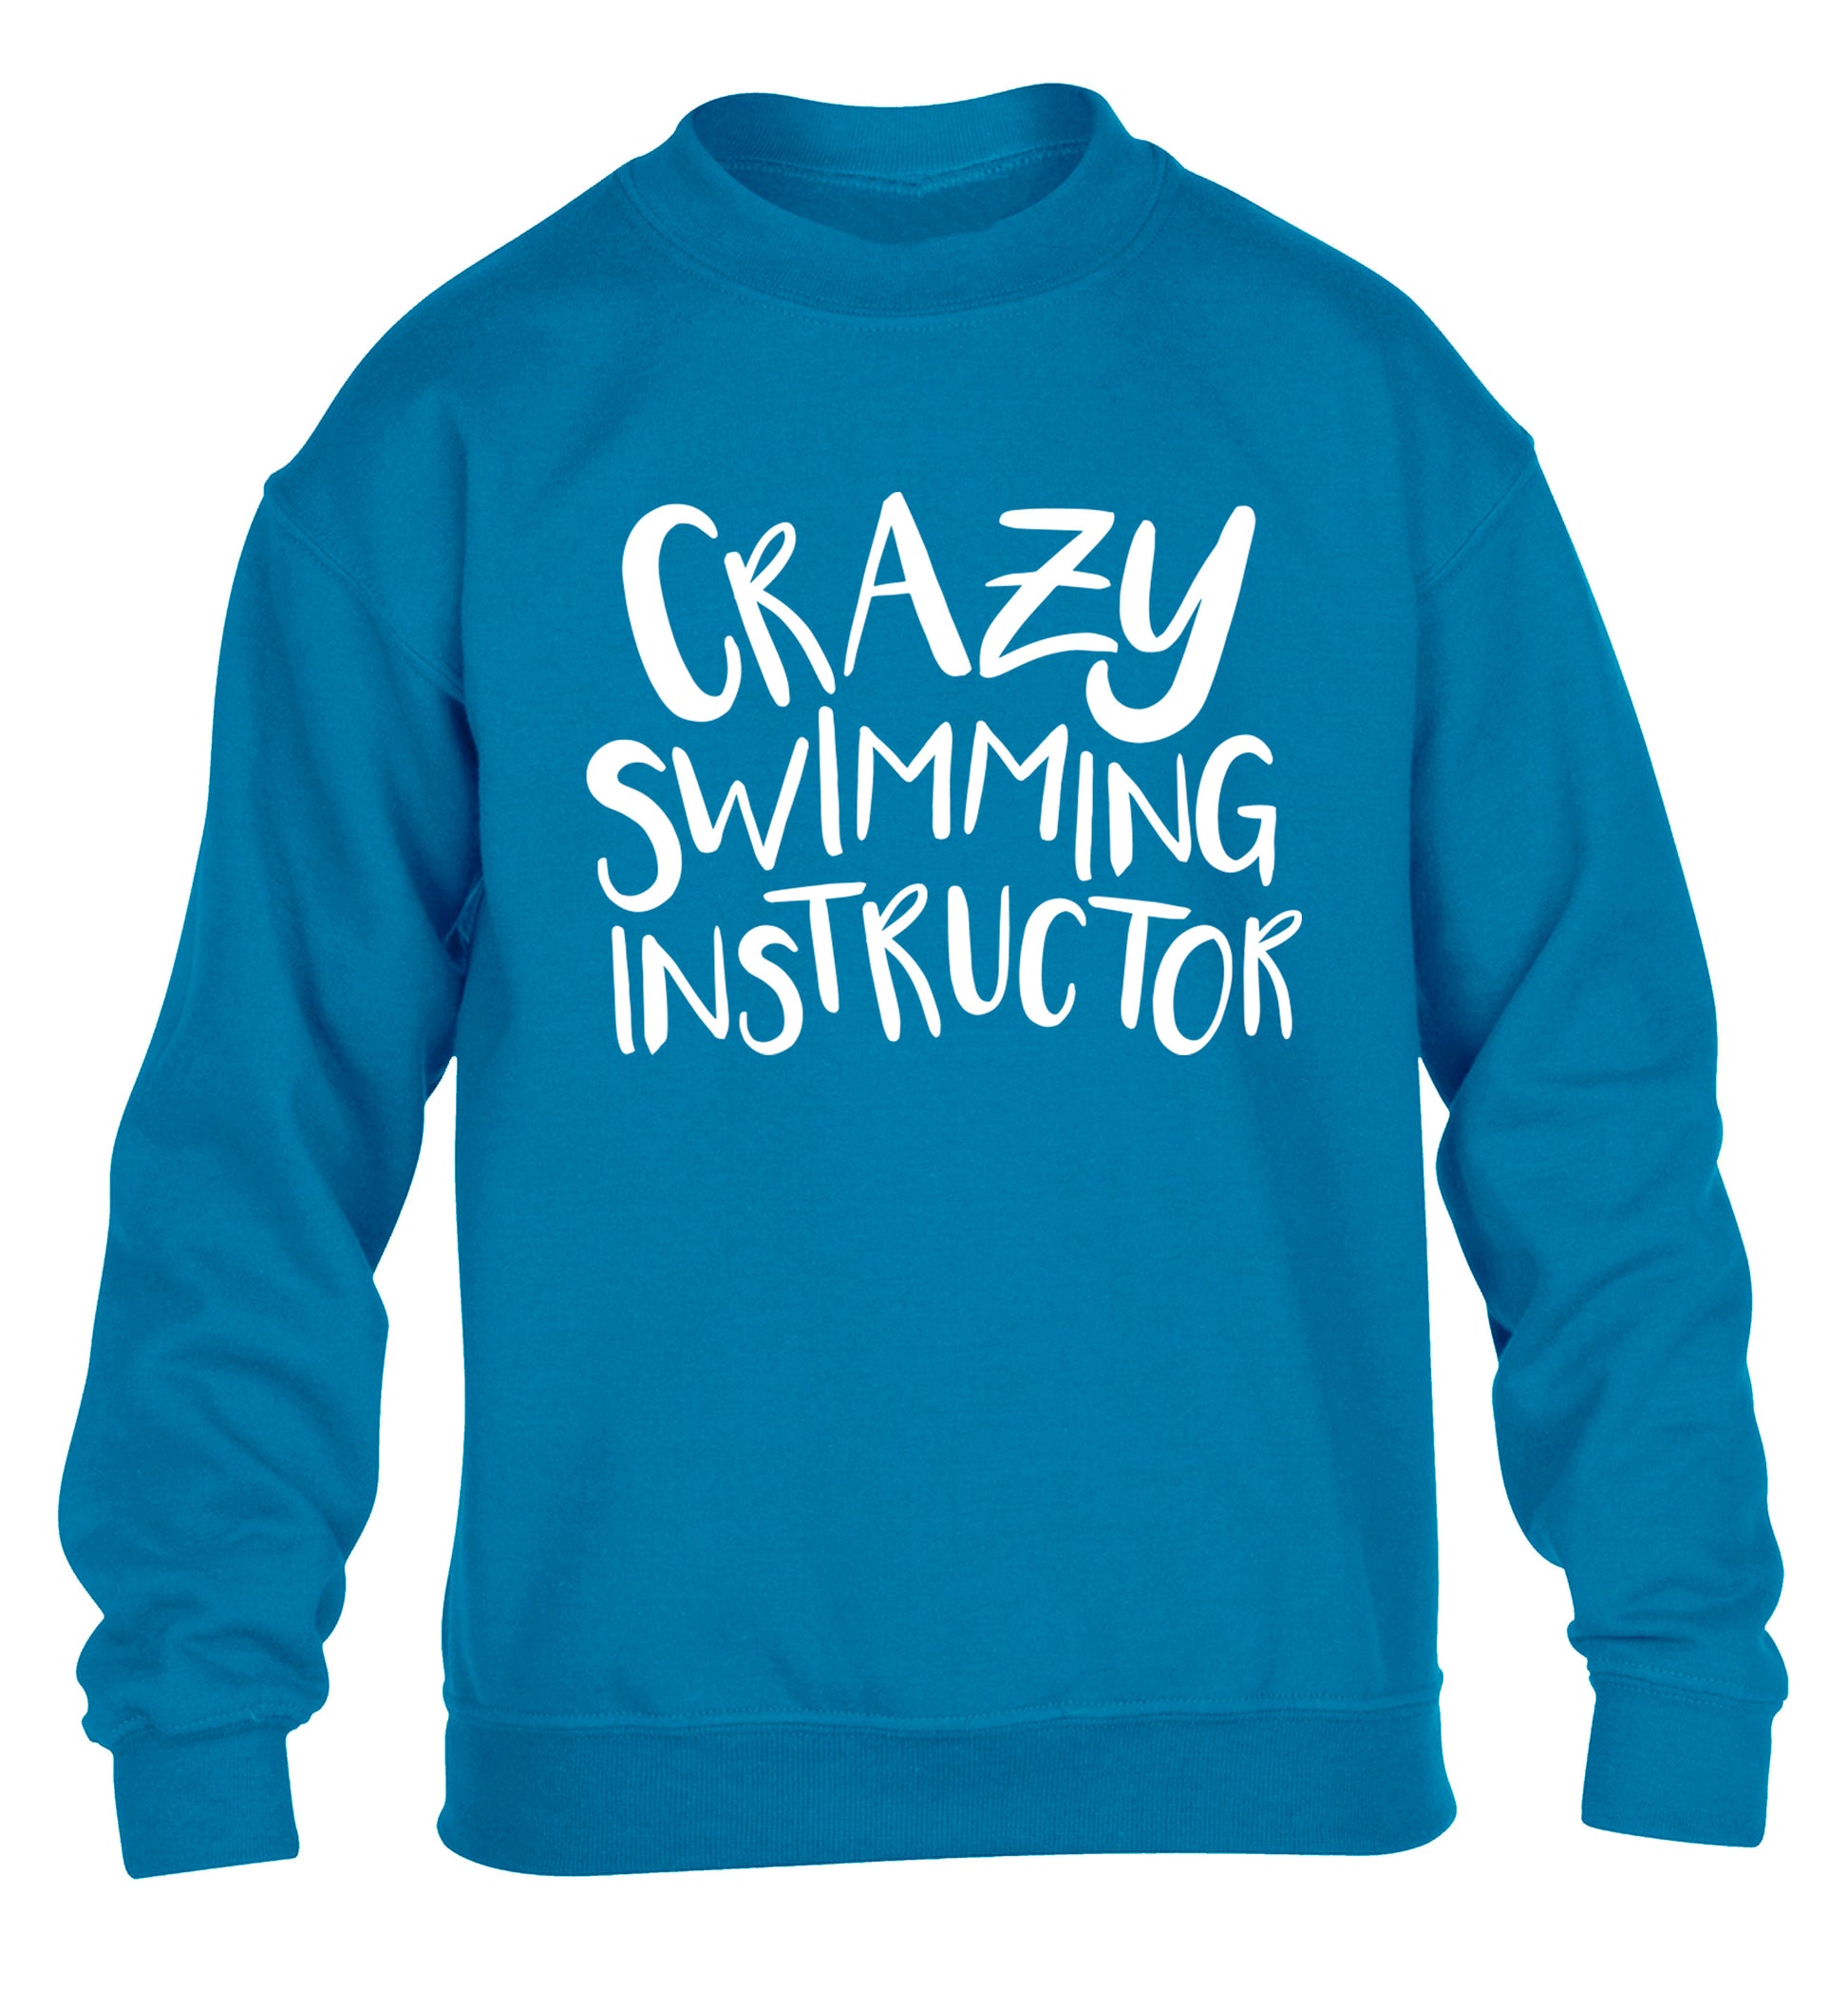 Crazy swimming instructor children's blue sweater 12-13 Years